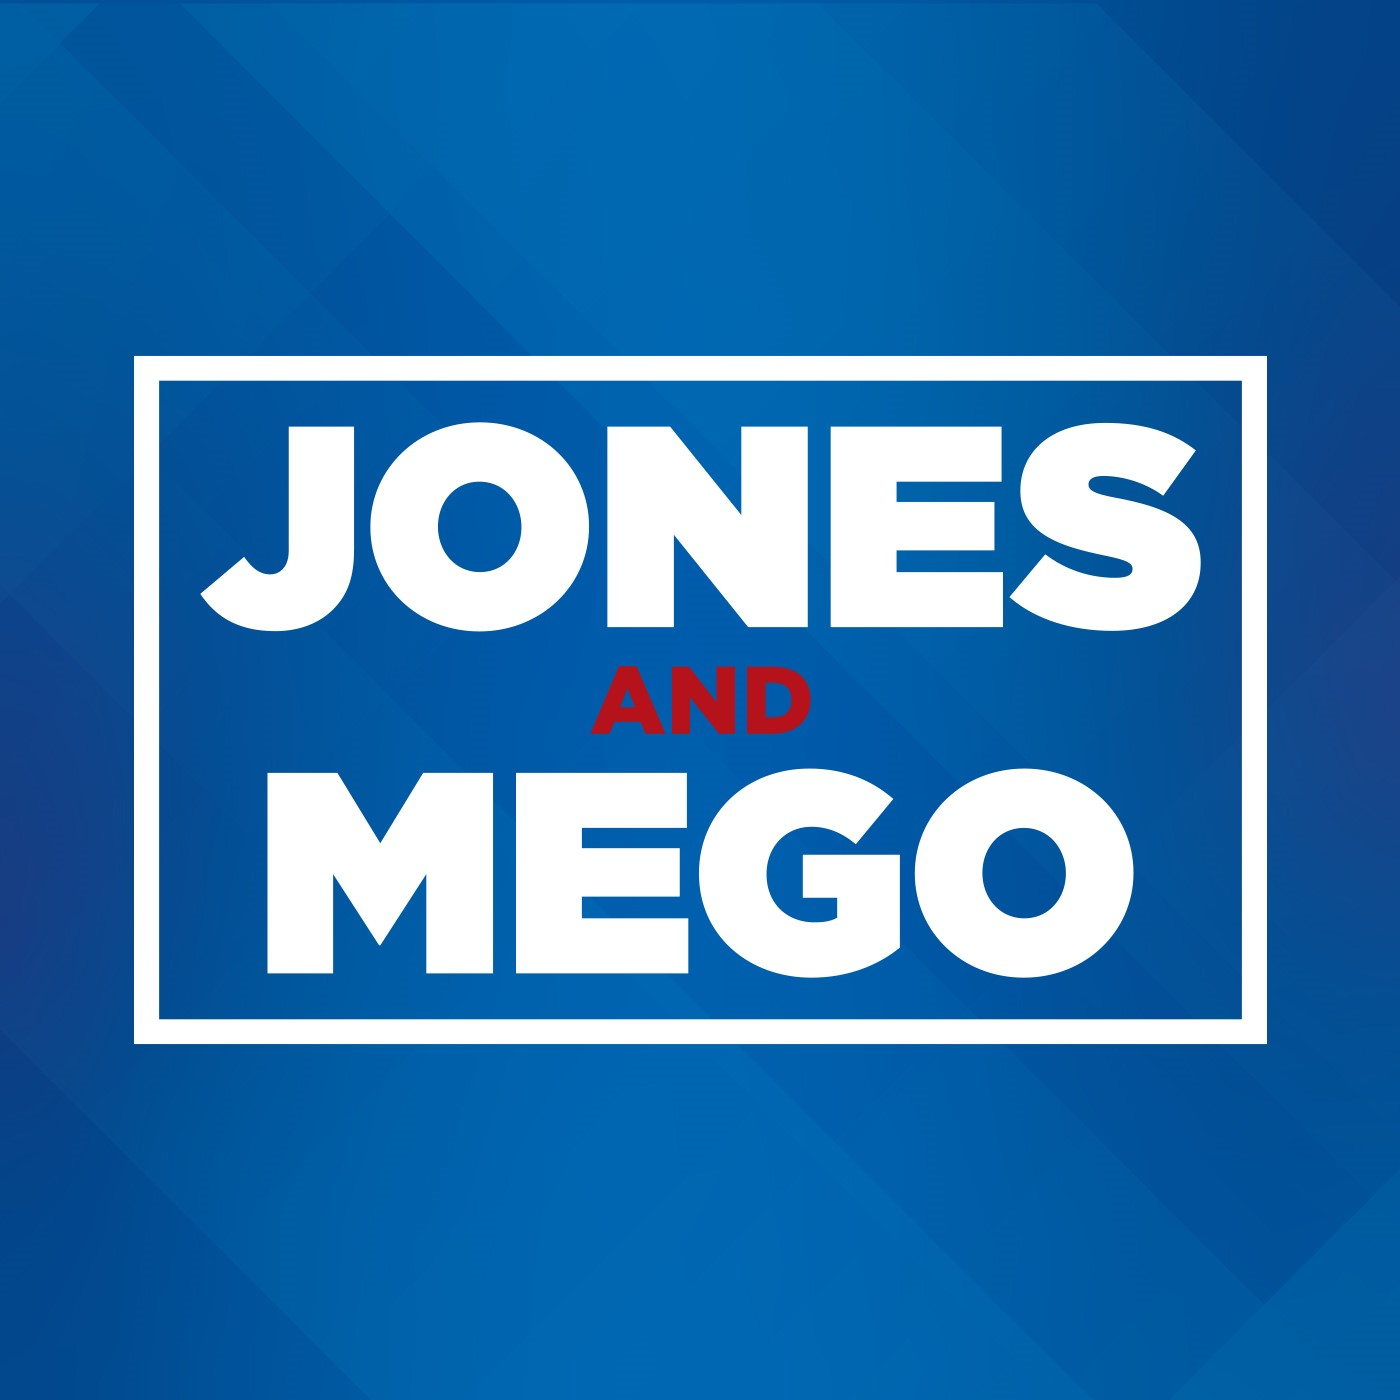 Jones and Mego are fed up with Henry and Kraft as owners